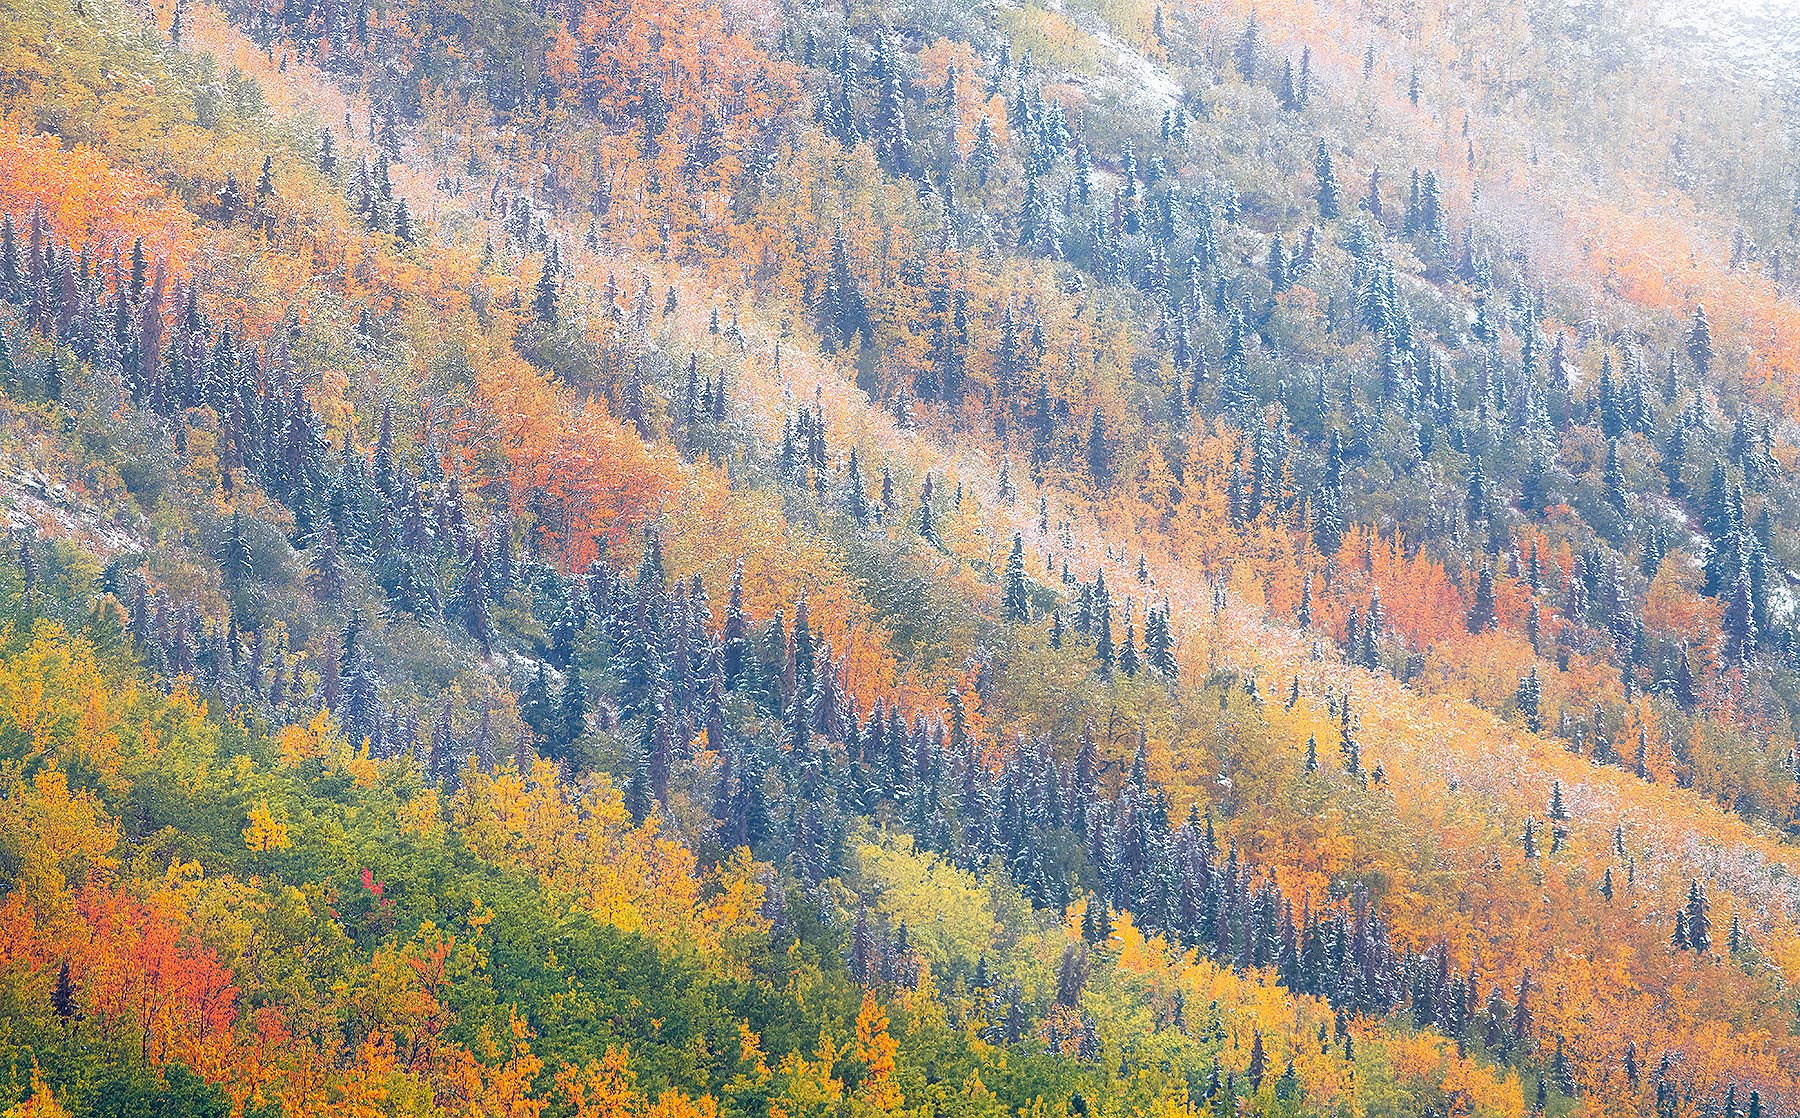 1000mm gives you a lot more options when composing layered landscapes like this rare combination of snow and autumn colors!